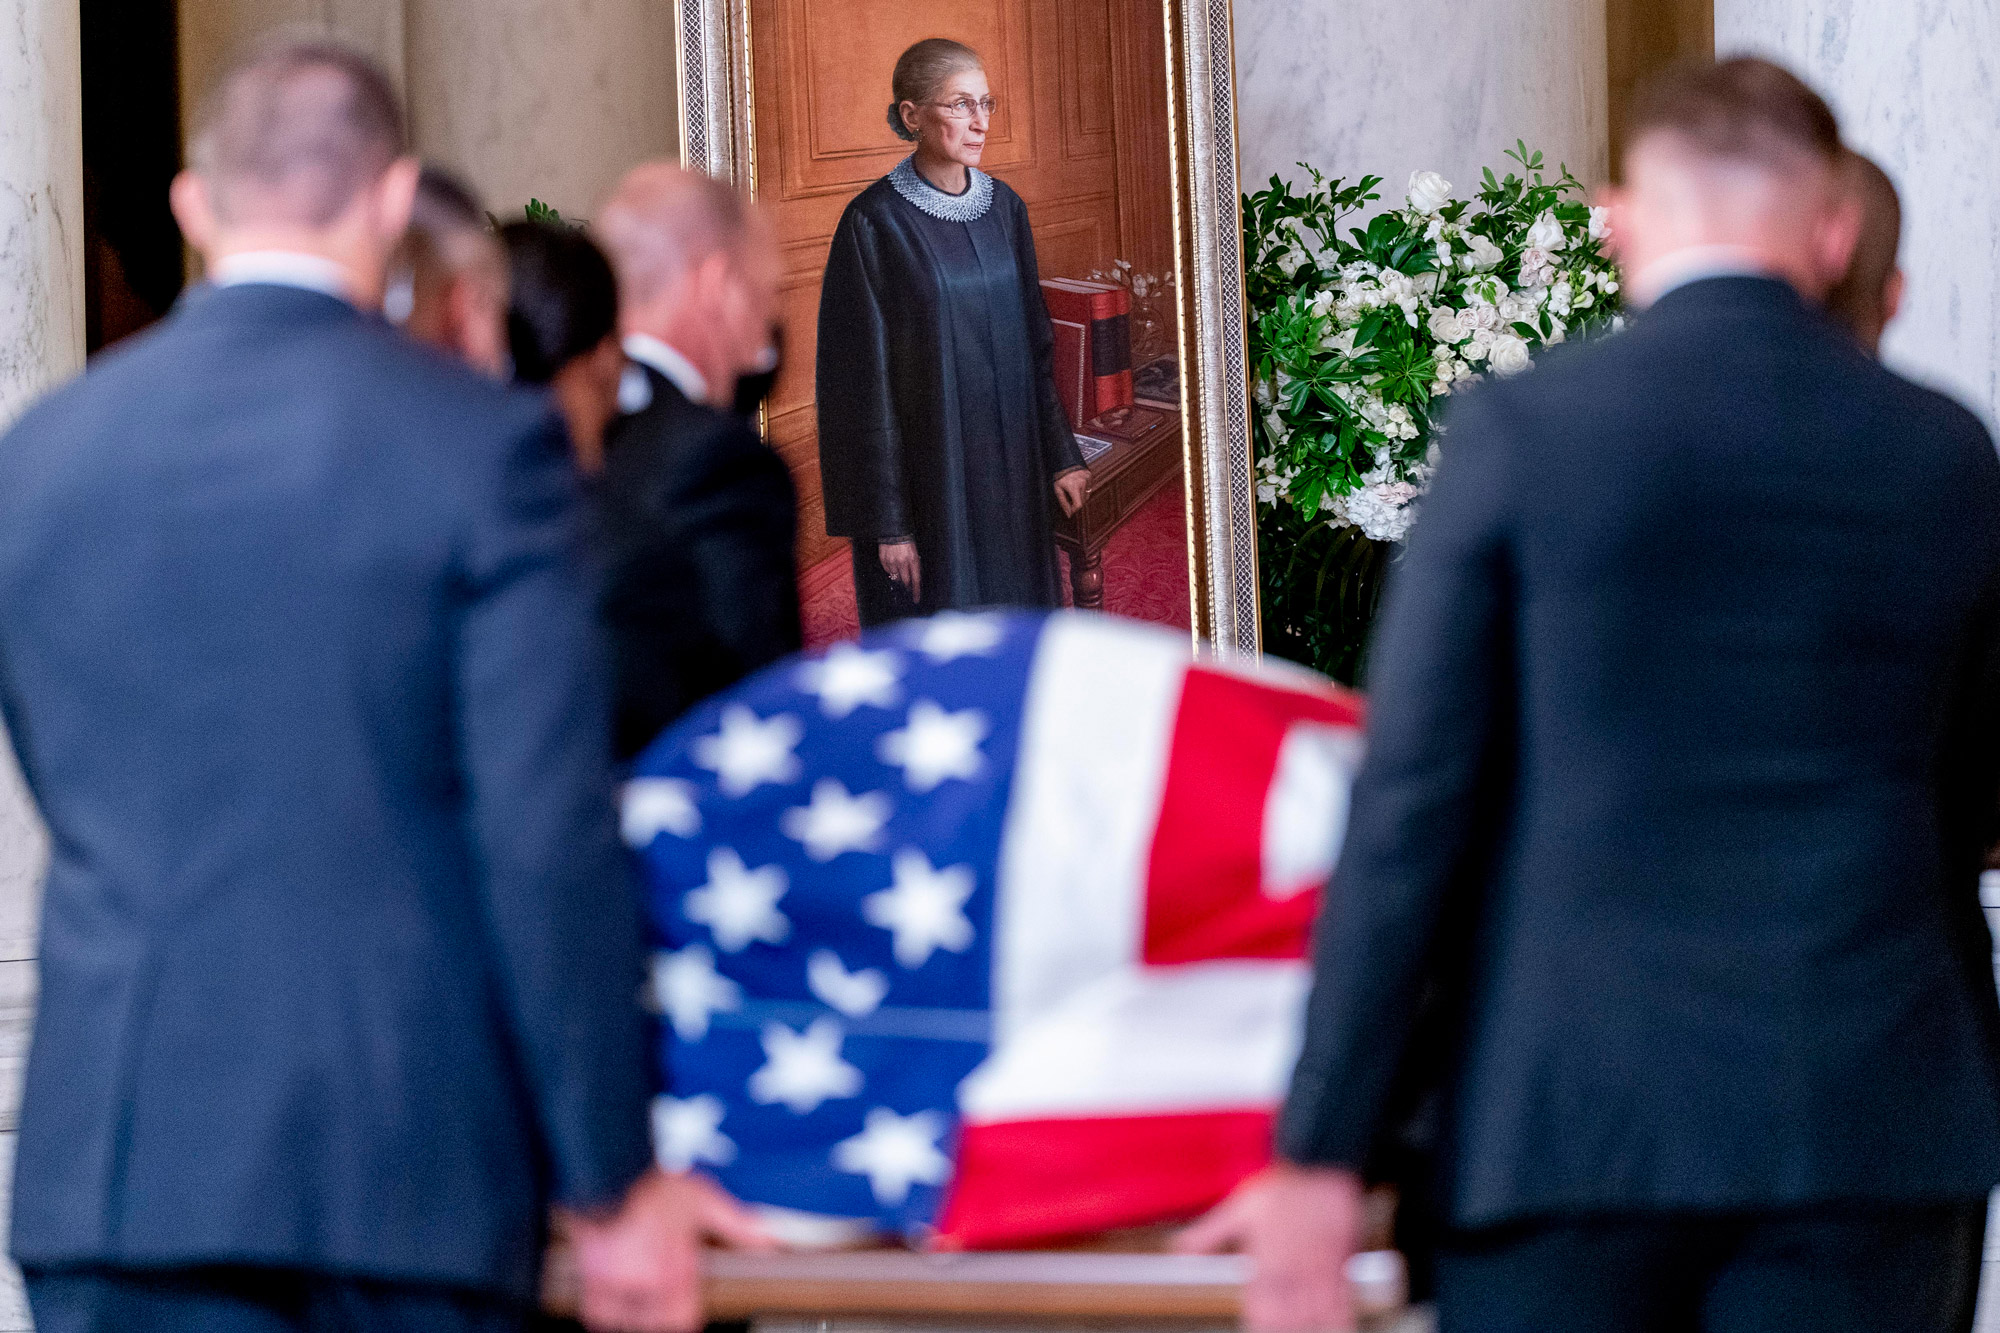 The flag-draped casket of Associate Justice Ruth Bader Ginsburg arrives in the Great Hall at the U.S. Supreme Court, on September 23 in Washington, DC. 